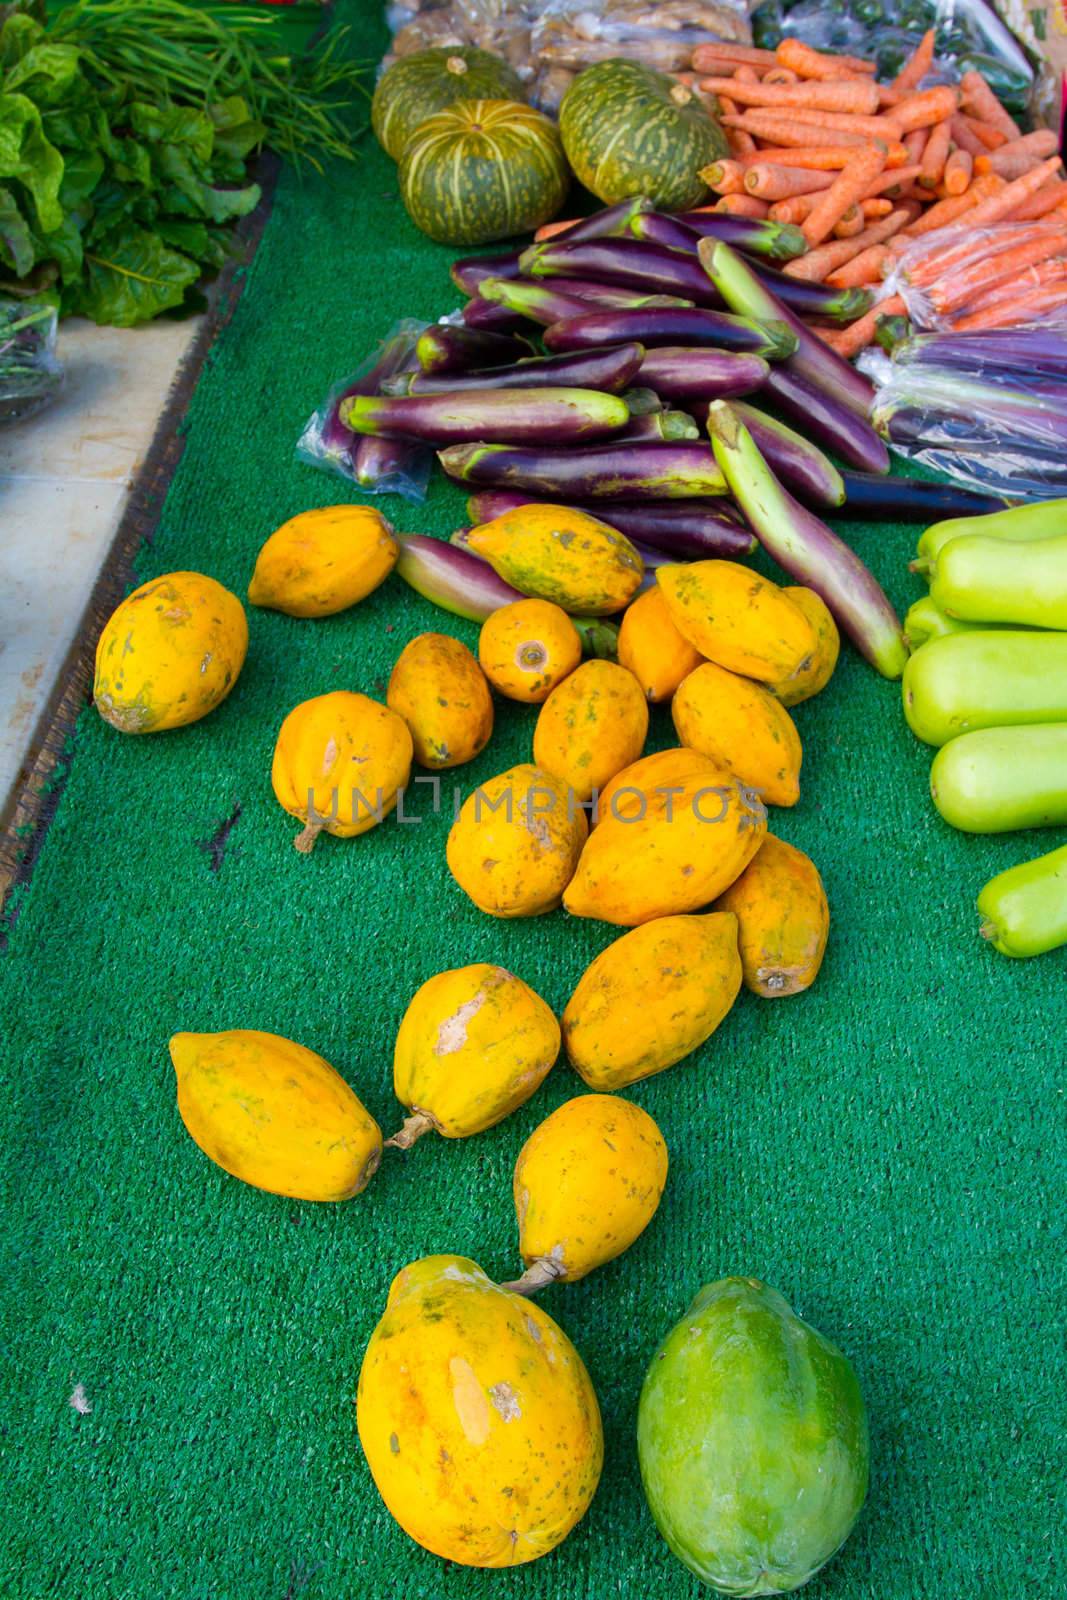 Images from a farmers market in Hawaii showing tropical fruits or vegetables in simple photos with vibrant colors.